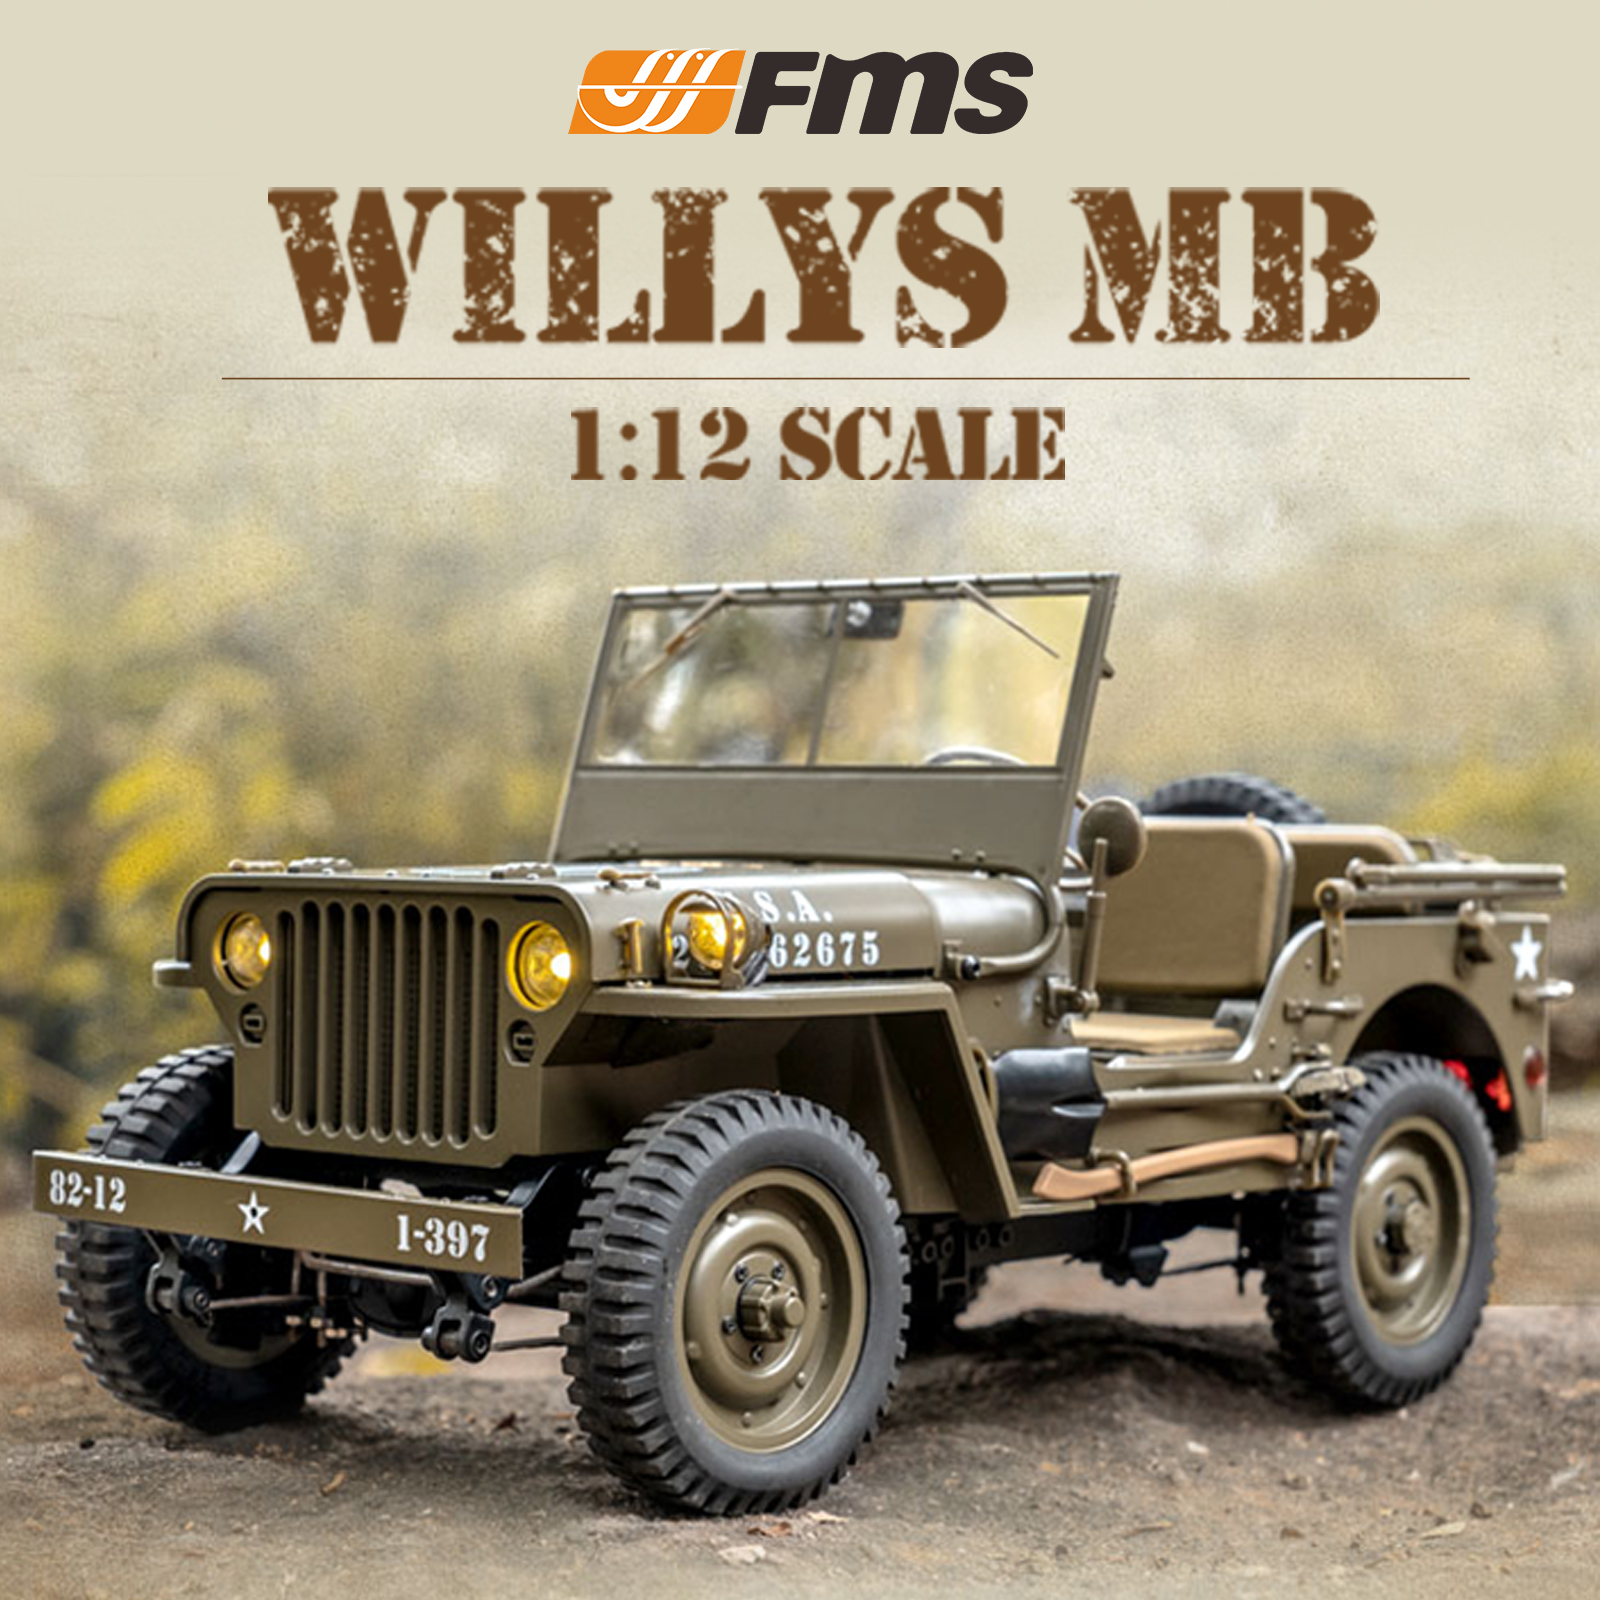 Fms RC Truck 1/12 1941 MB Scale Willys Military Vehicle 4wd with  Transmitter Battery and Charger